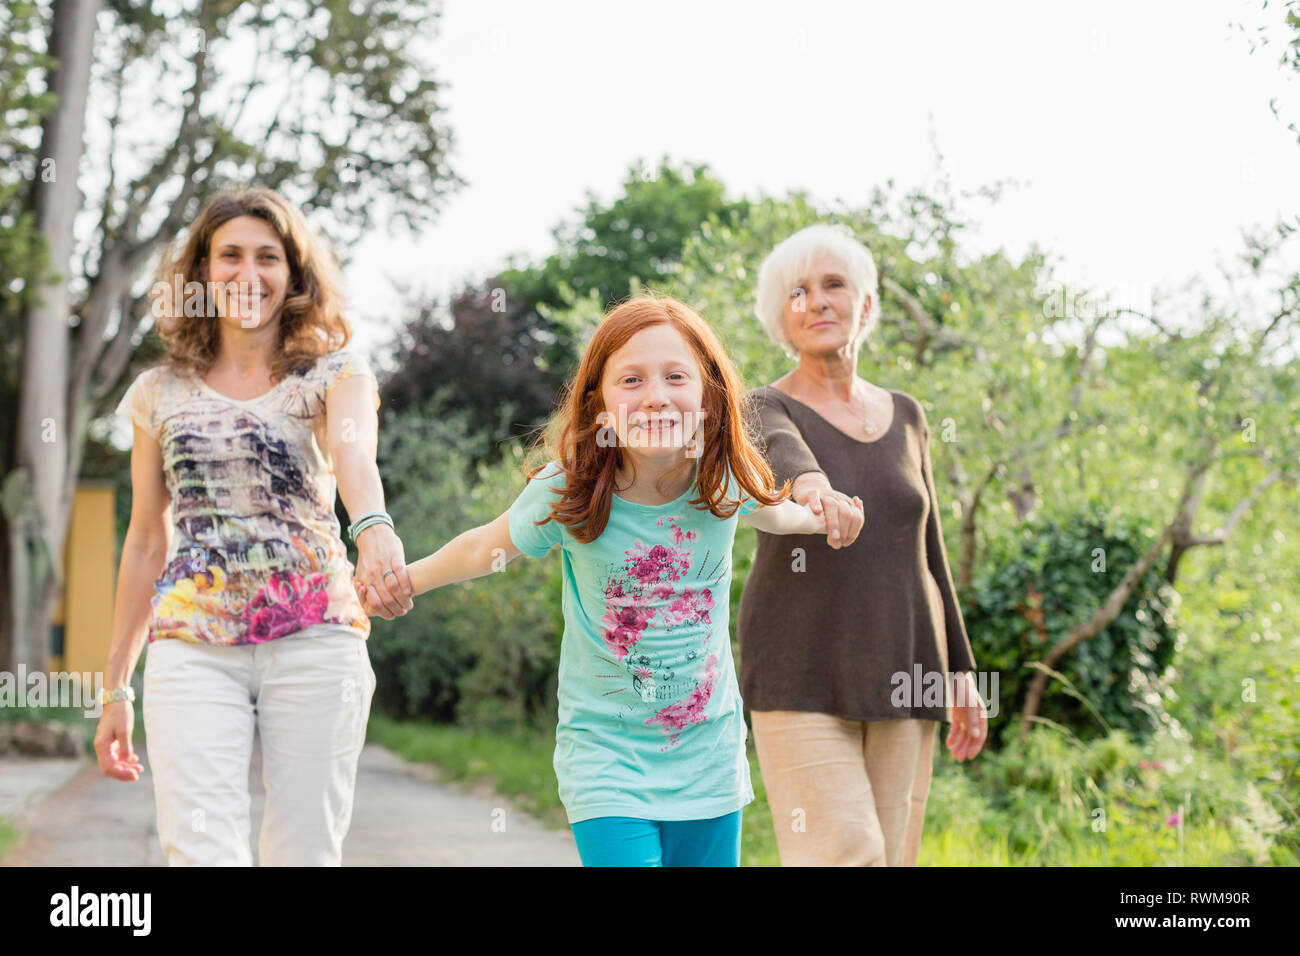 Girl on rural road holding hands with mother and grandmother, portrait Stock Photo